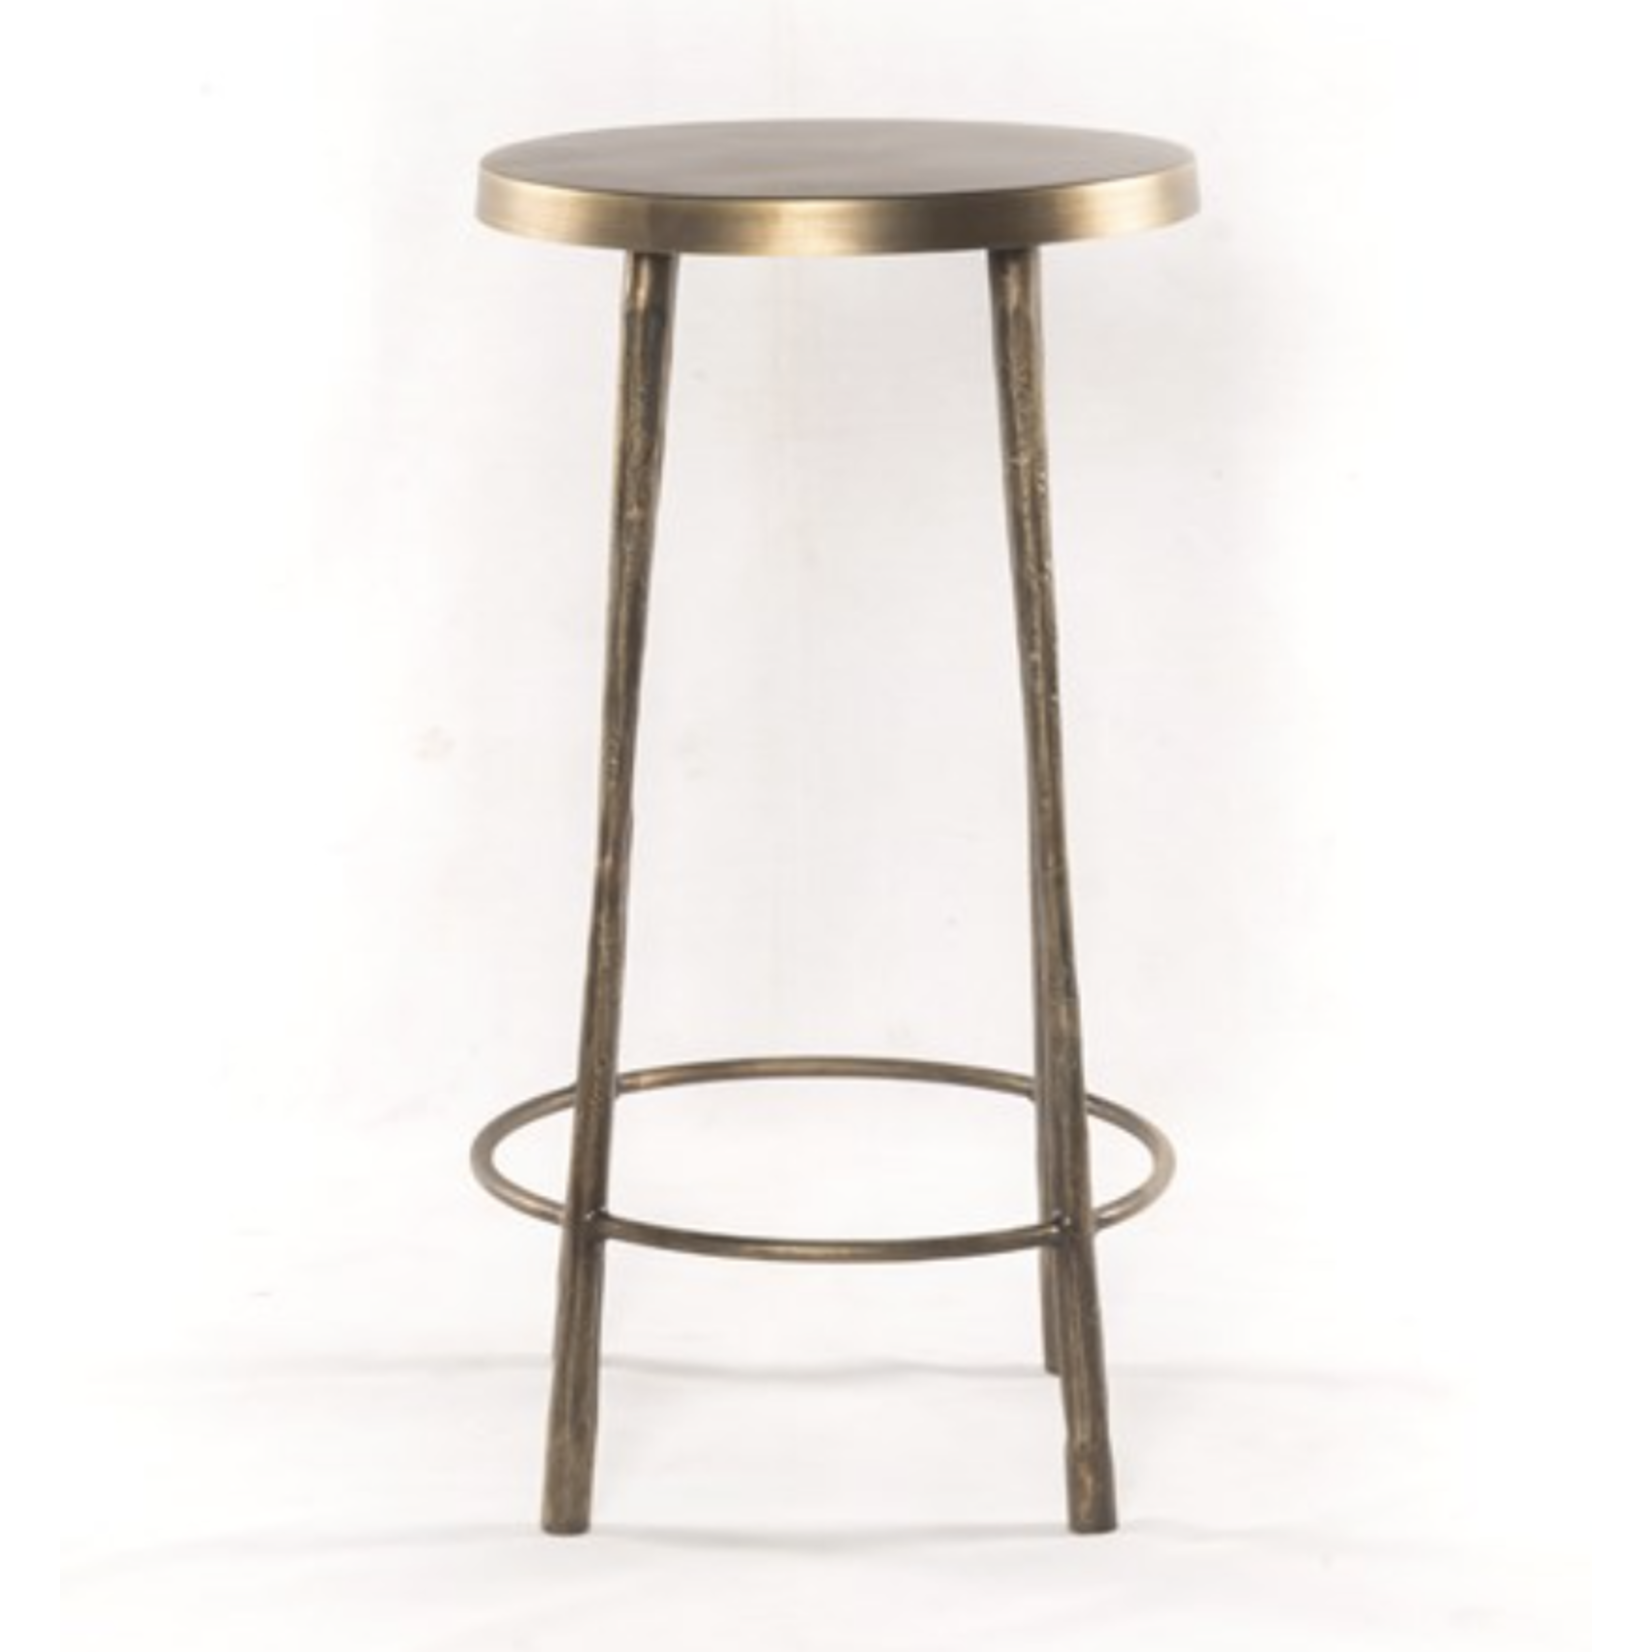 26" Alena Brass Hand-crafted Counter Stool